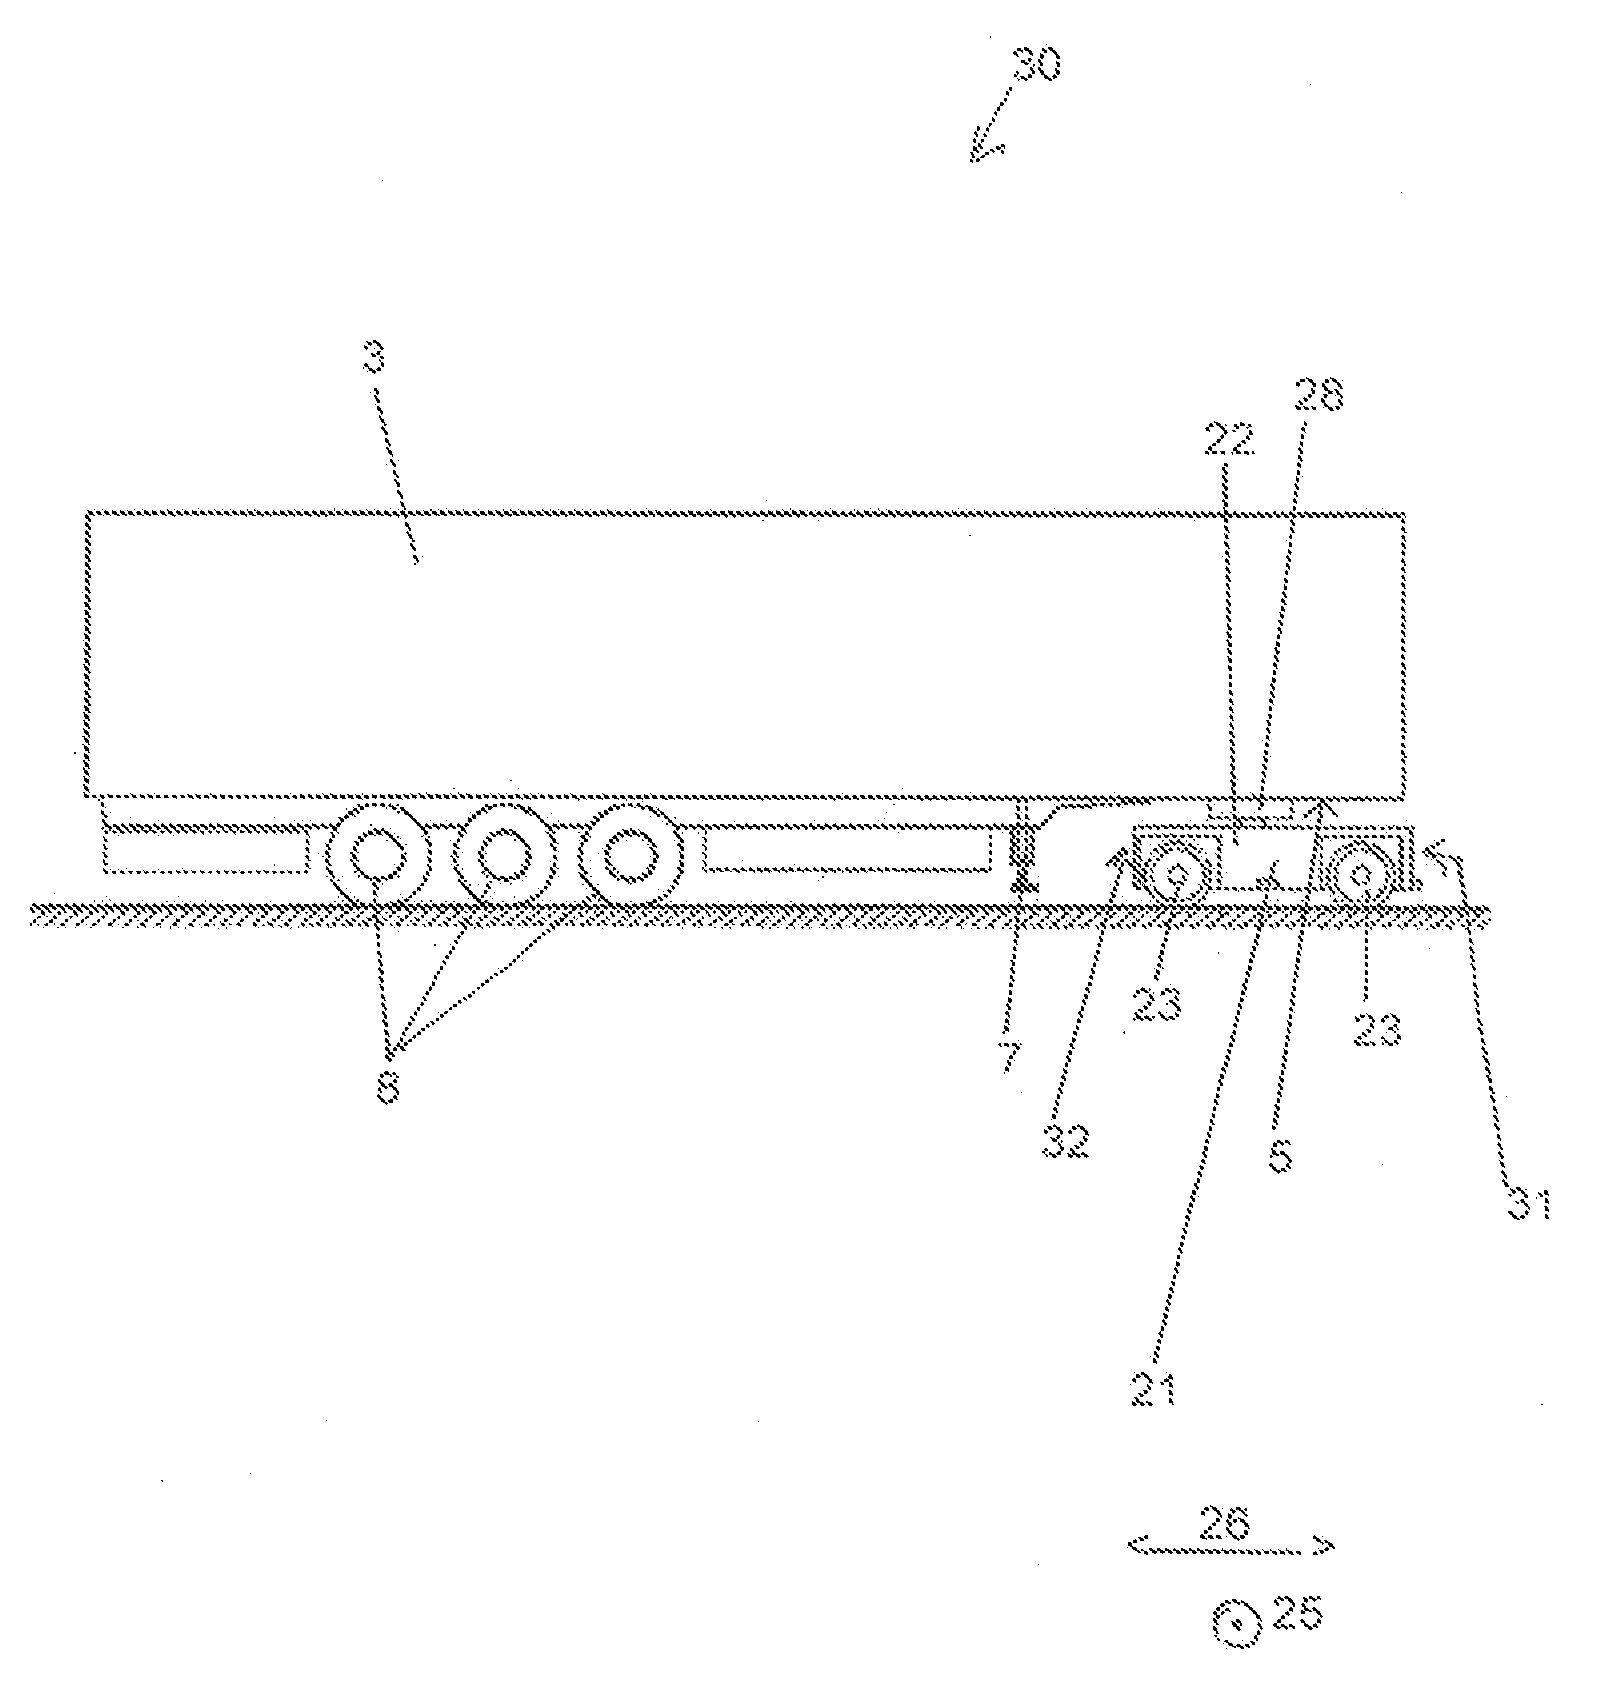 Method and transfer terminal for transferring semi-trailers from railway to roadway, and vice versa and for transporting semi-trailers by rail, as well as traction vehicle for semi-trailers and tractor trailer unit